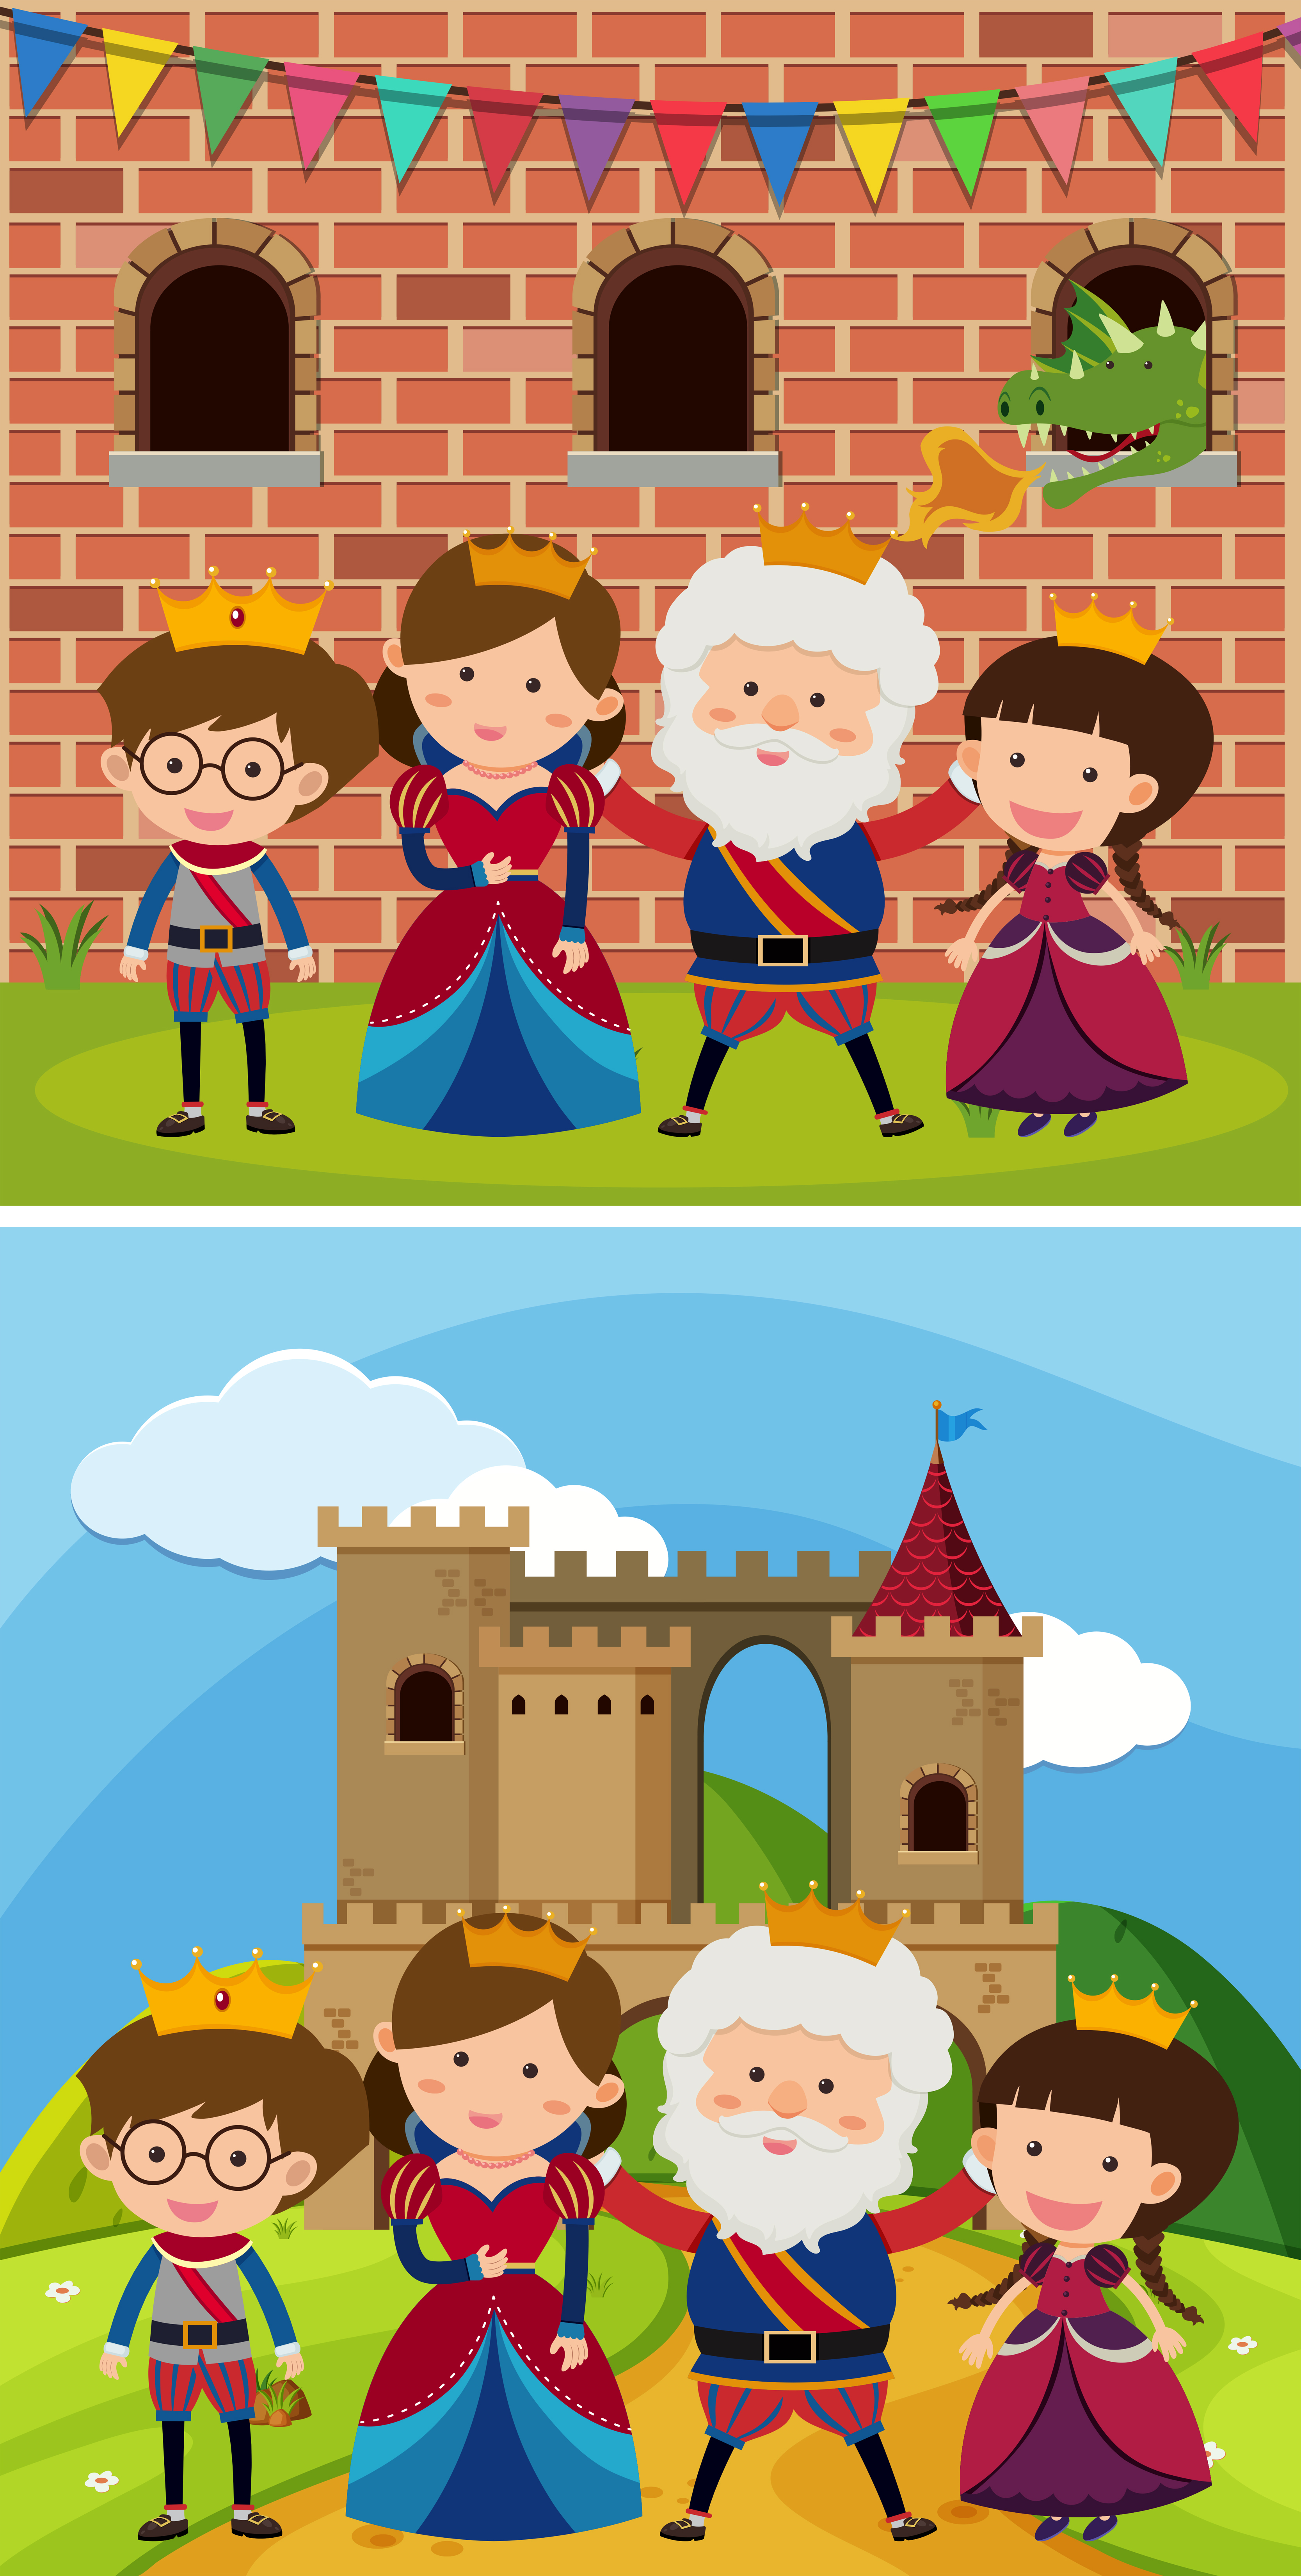 Download Royal Family Free Vector Art - (32 Free Downloads)